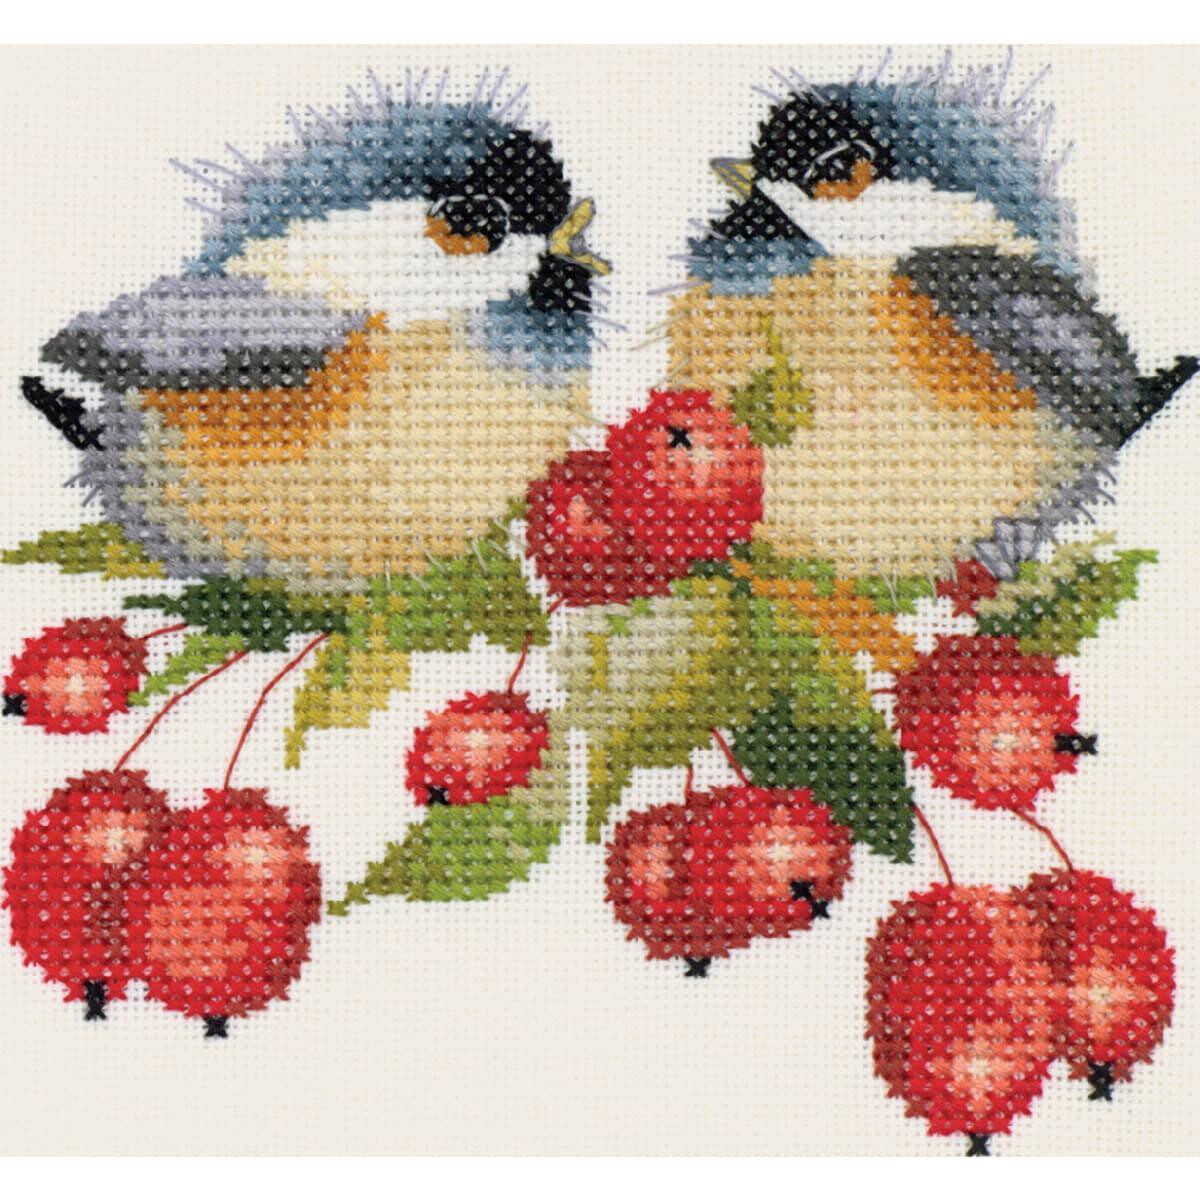 Heritage counted cross stitch kit Aida "Berry...